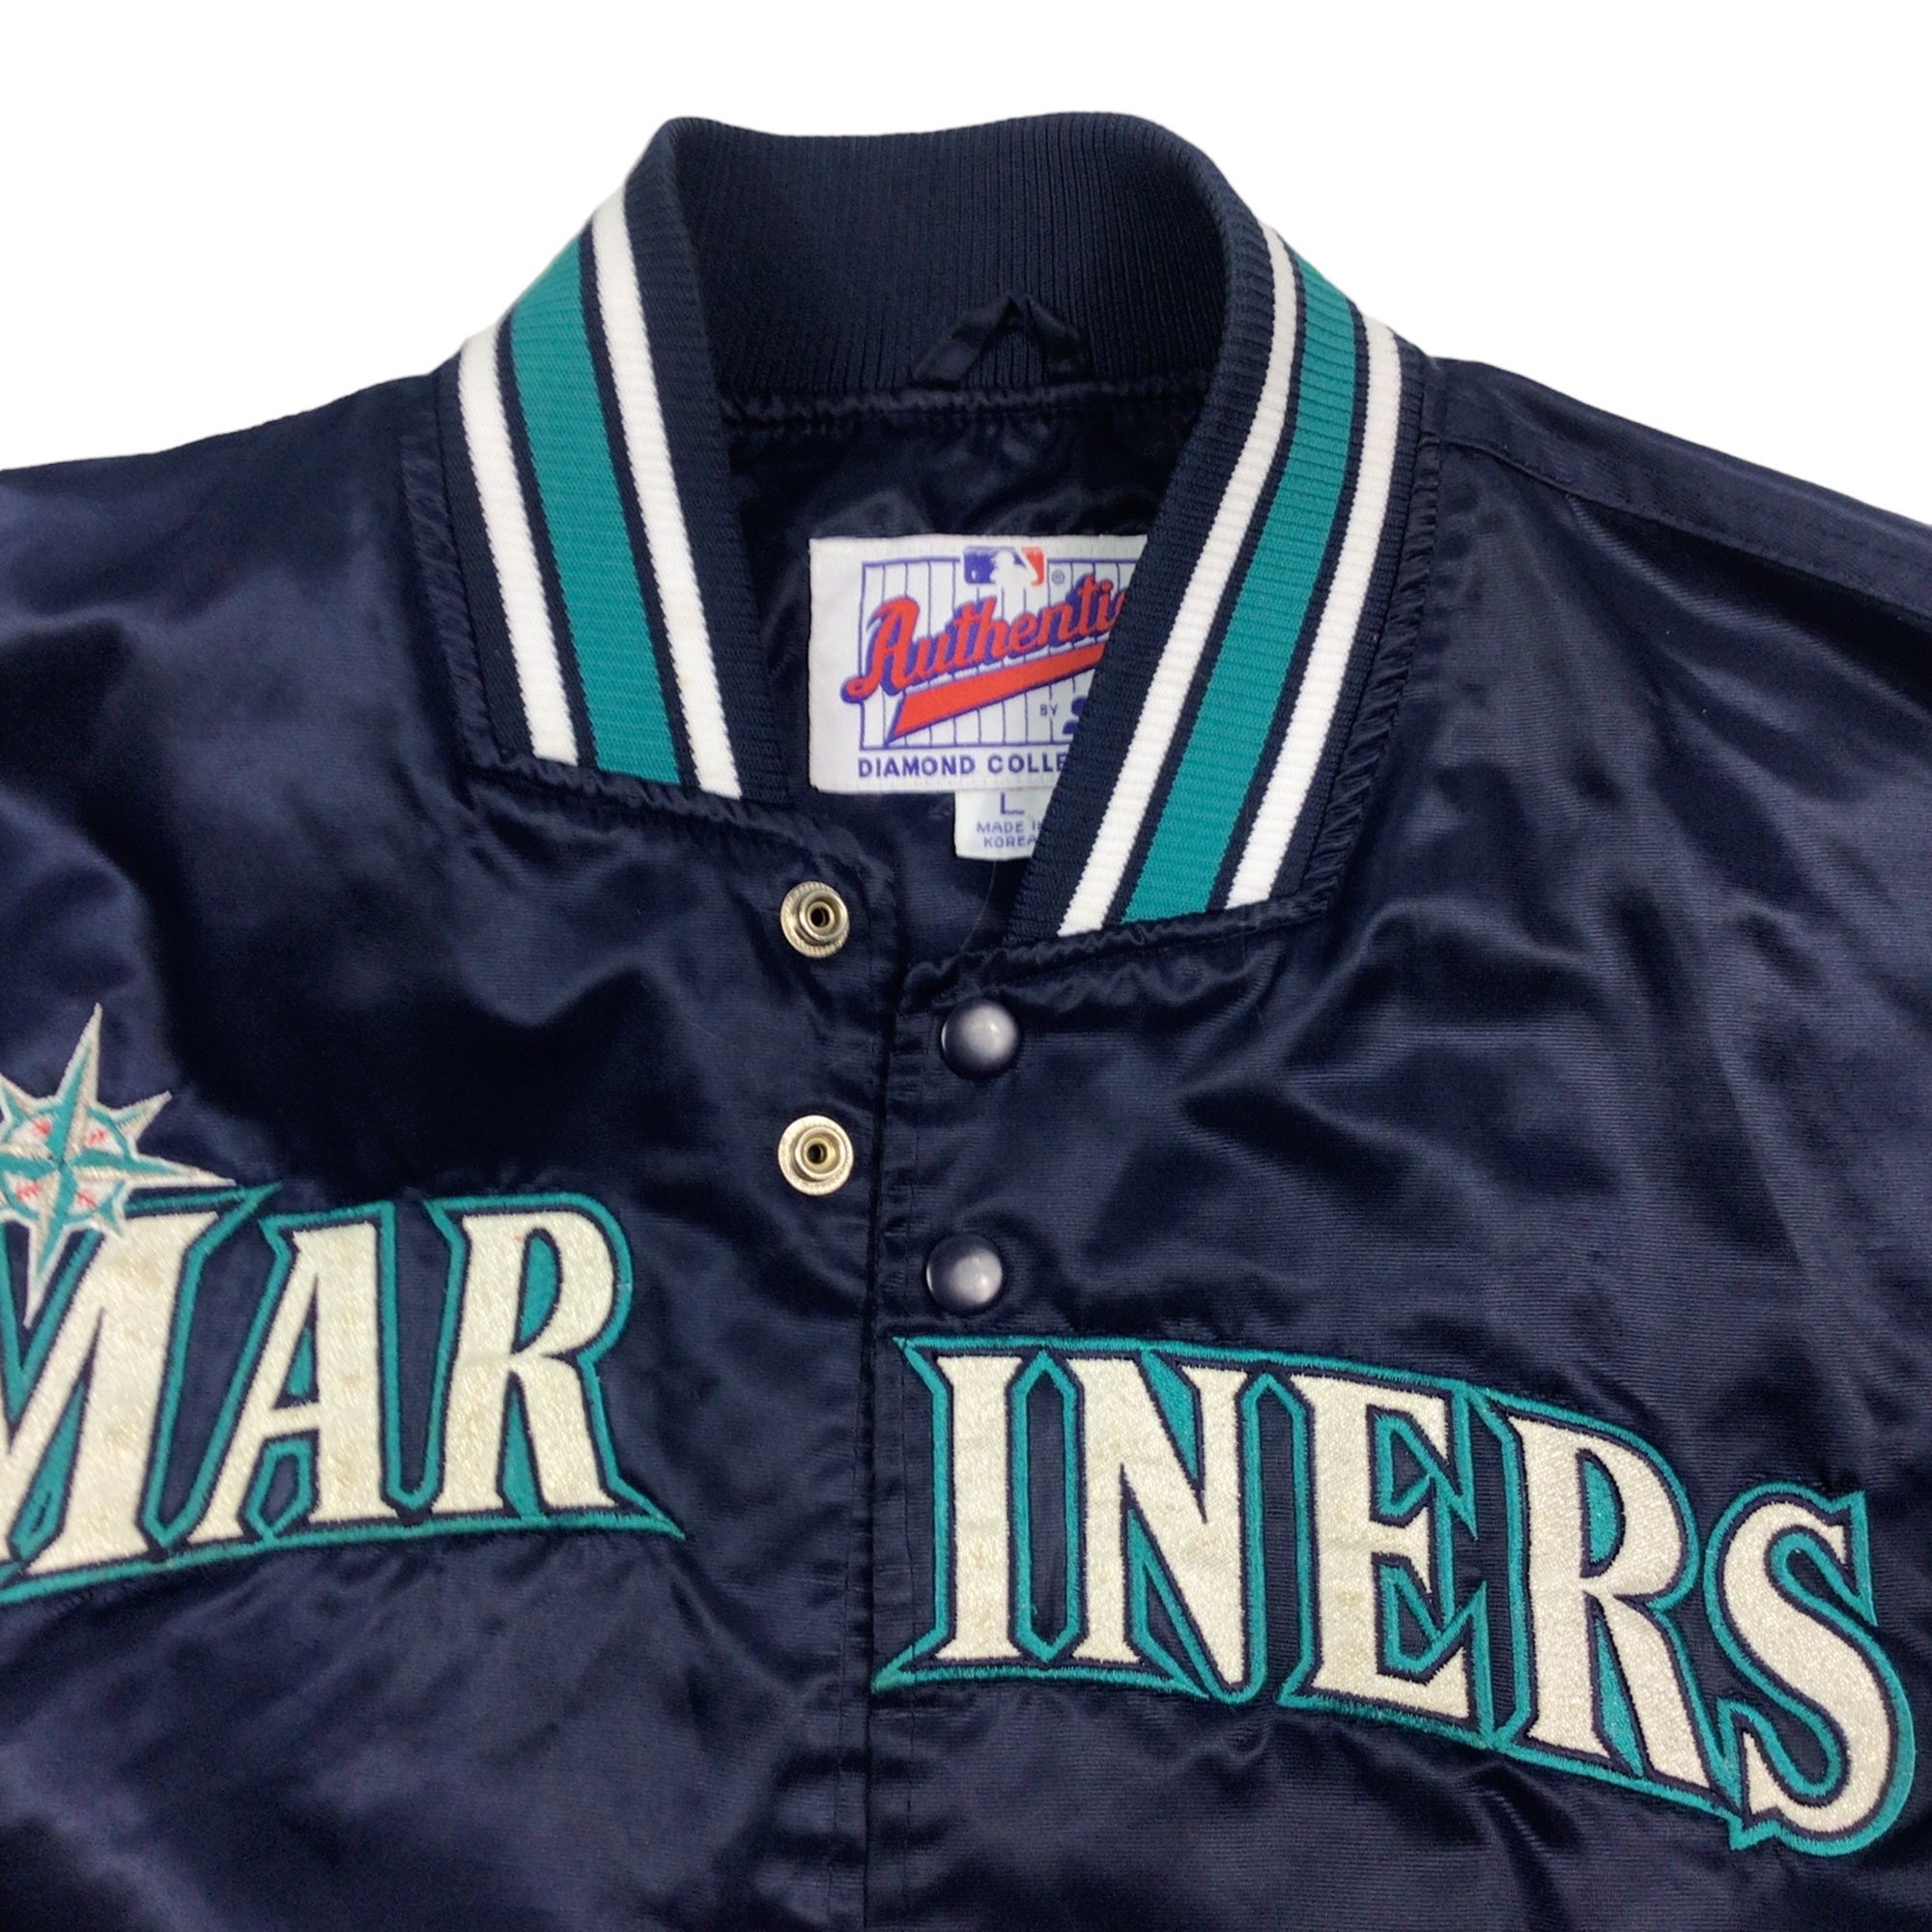 Seattle Mariners Starter jacket from the '90s, Olympus digi…